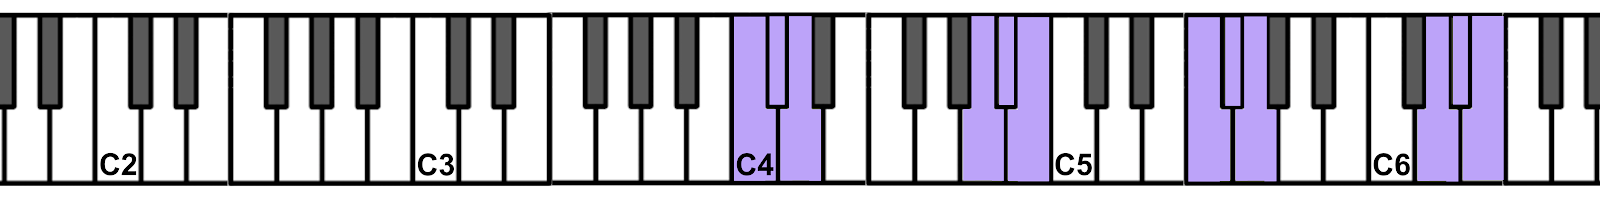 Diagram of piano keys illustrating pitch stimuli for the oboe. Keys C2, C3, C4, C5, and C6 are labelled and 4 groups of keys are highlighted in purple. More description below